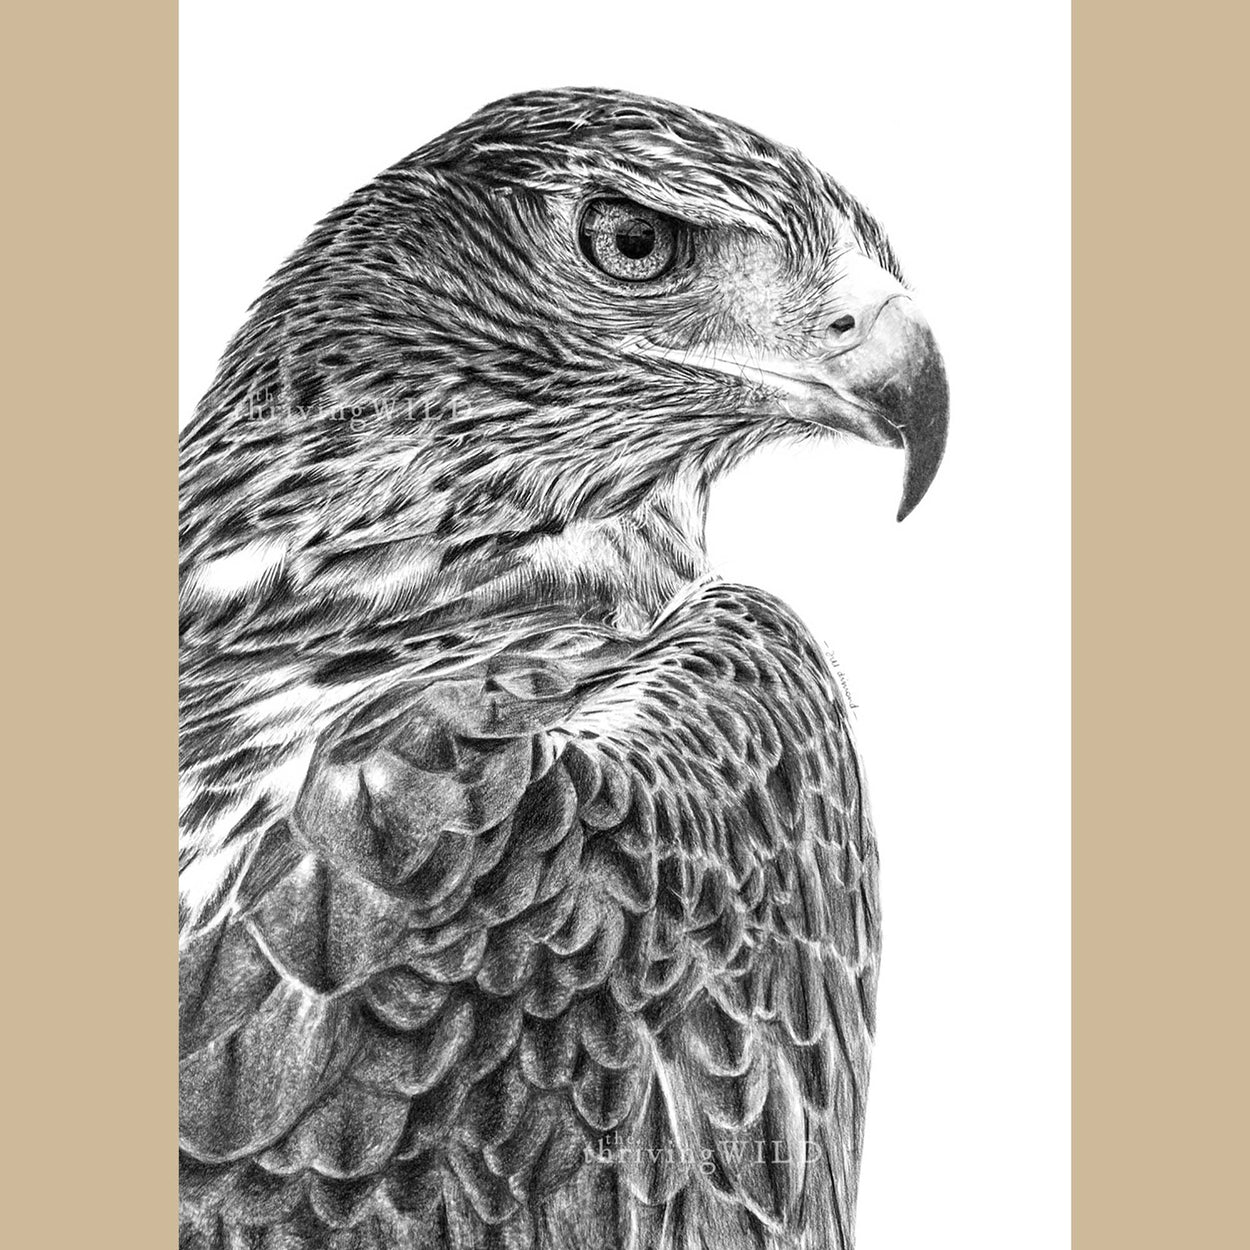 Black and white pencil drawing of a golden eagle head and shoulders